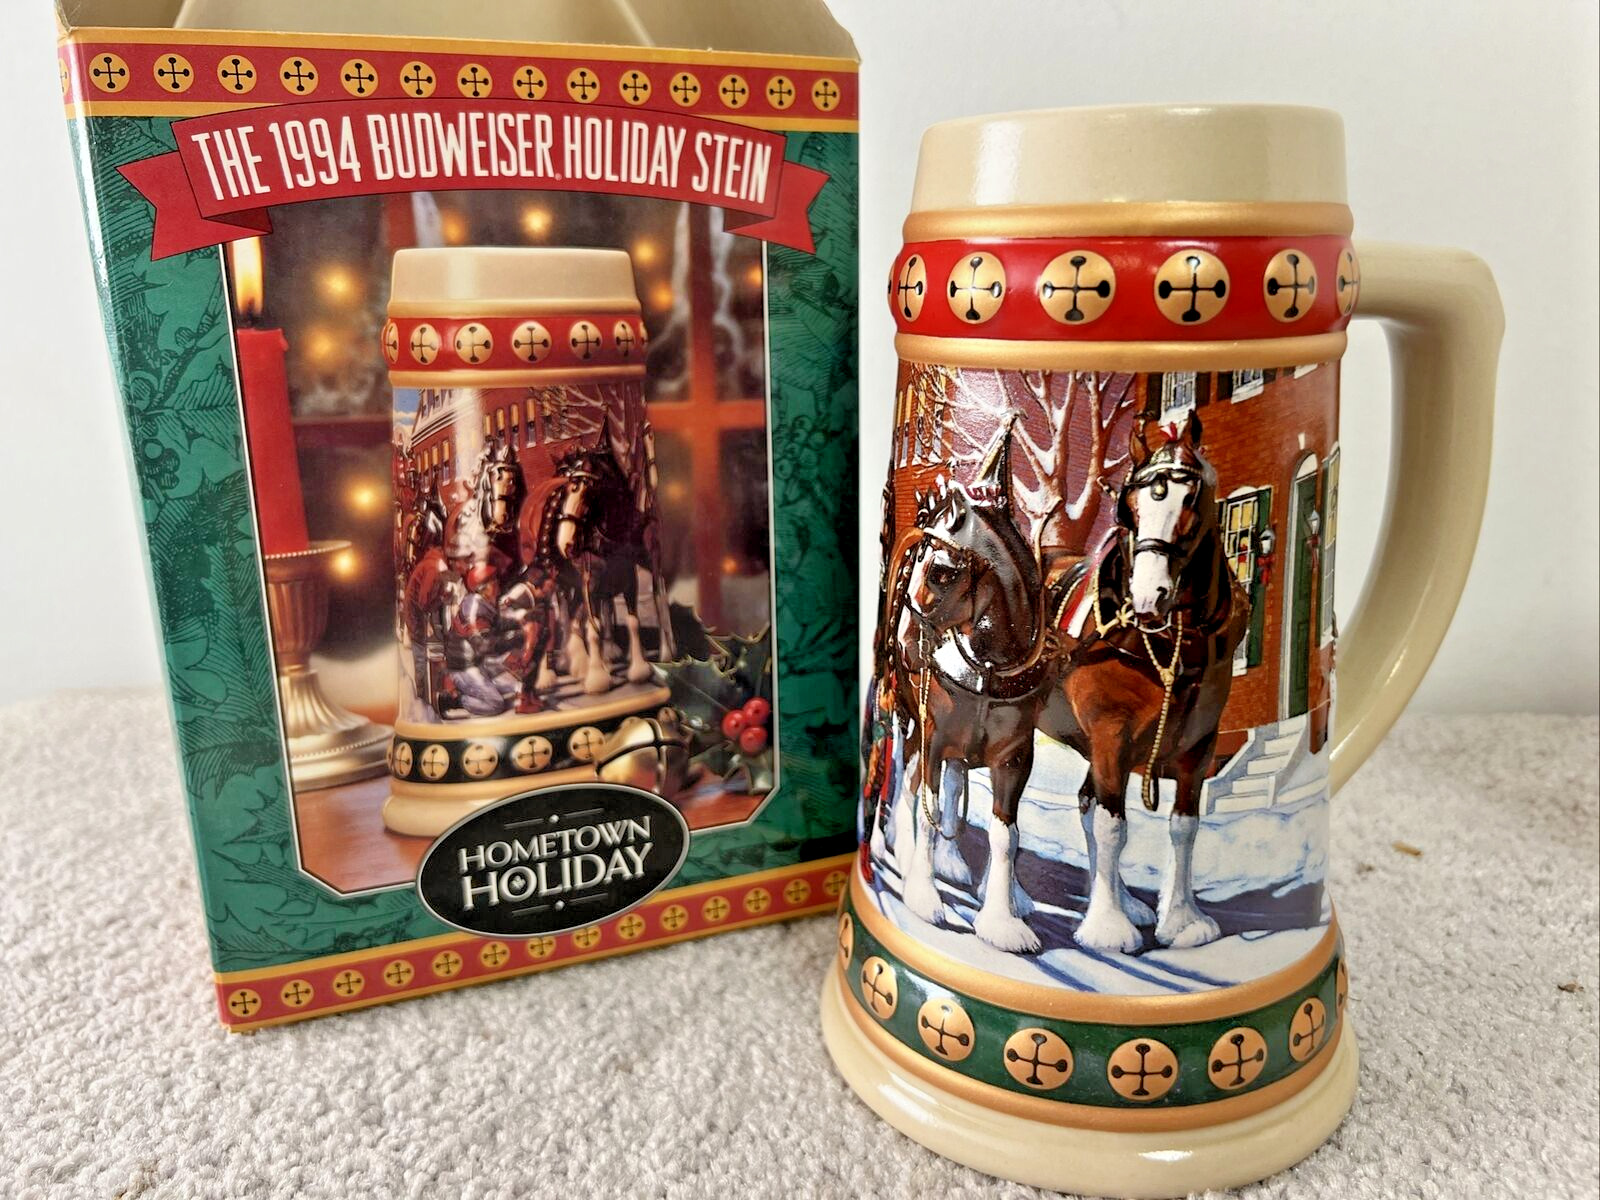 VINTAGE 1994 BUDWEISER HOLIDAY STEIN WITH COA ~ NEW IN BOX